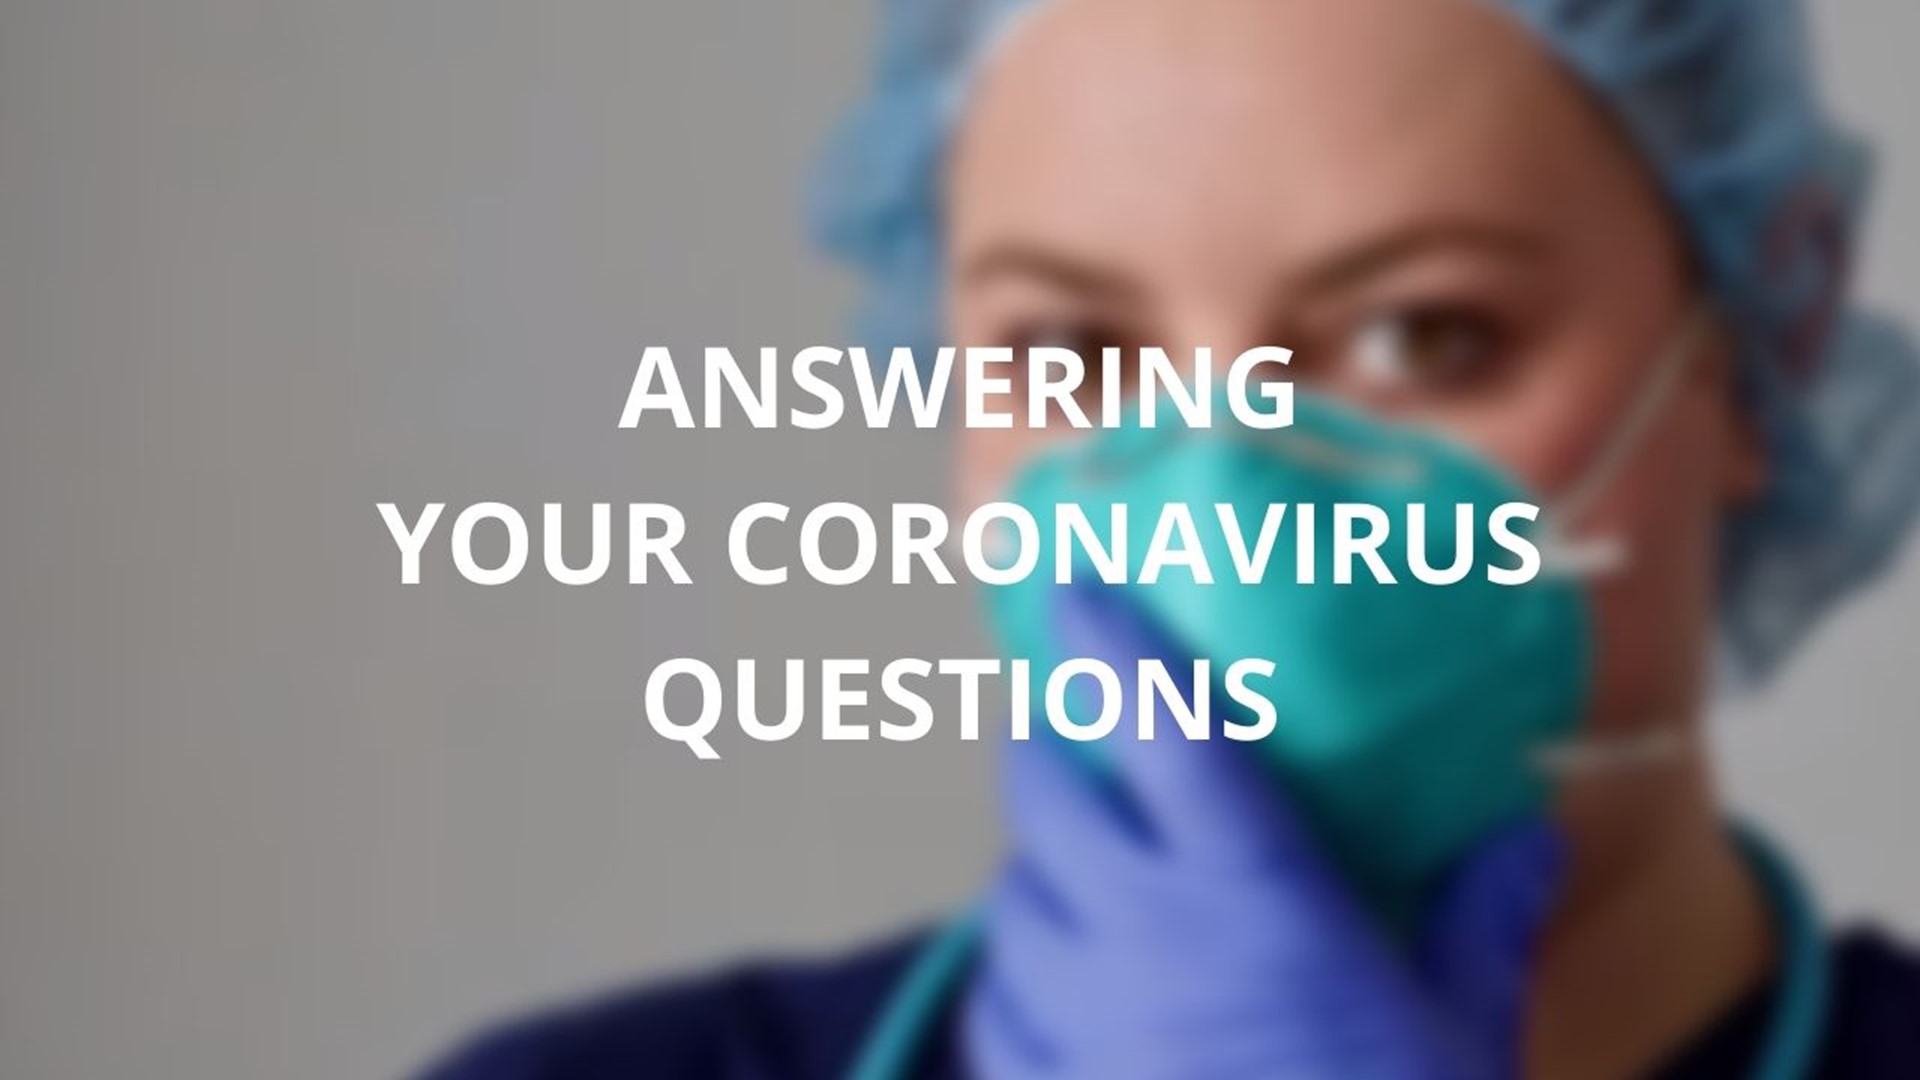 Here are answers to some of your common coronavirus questions